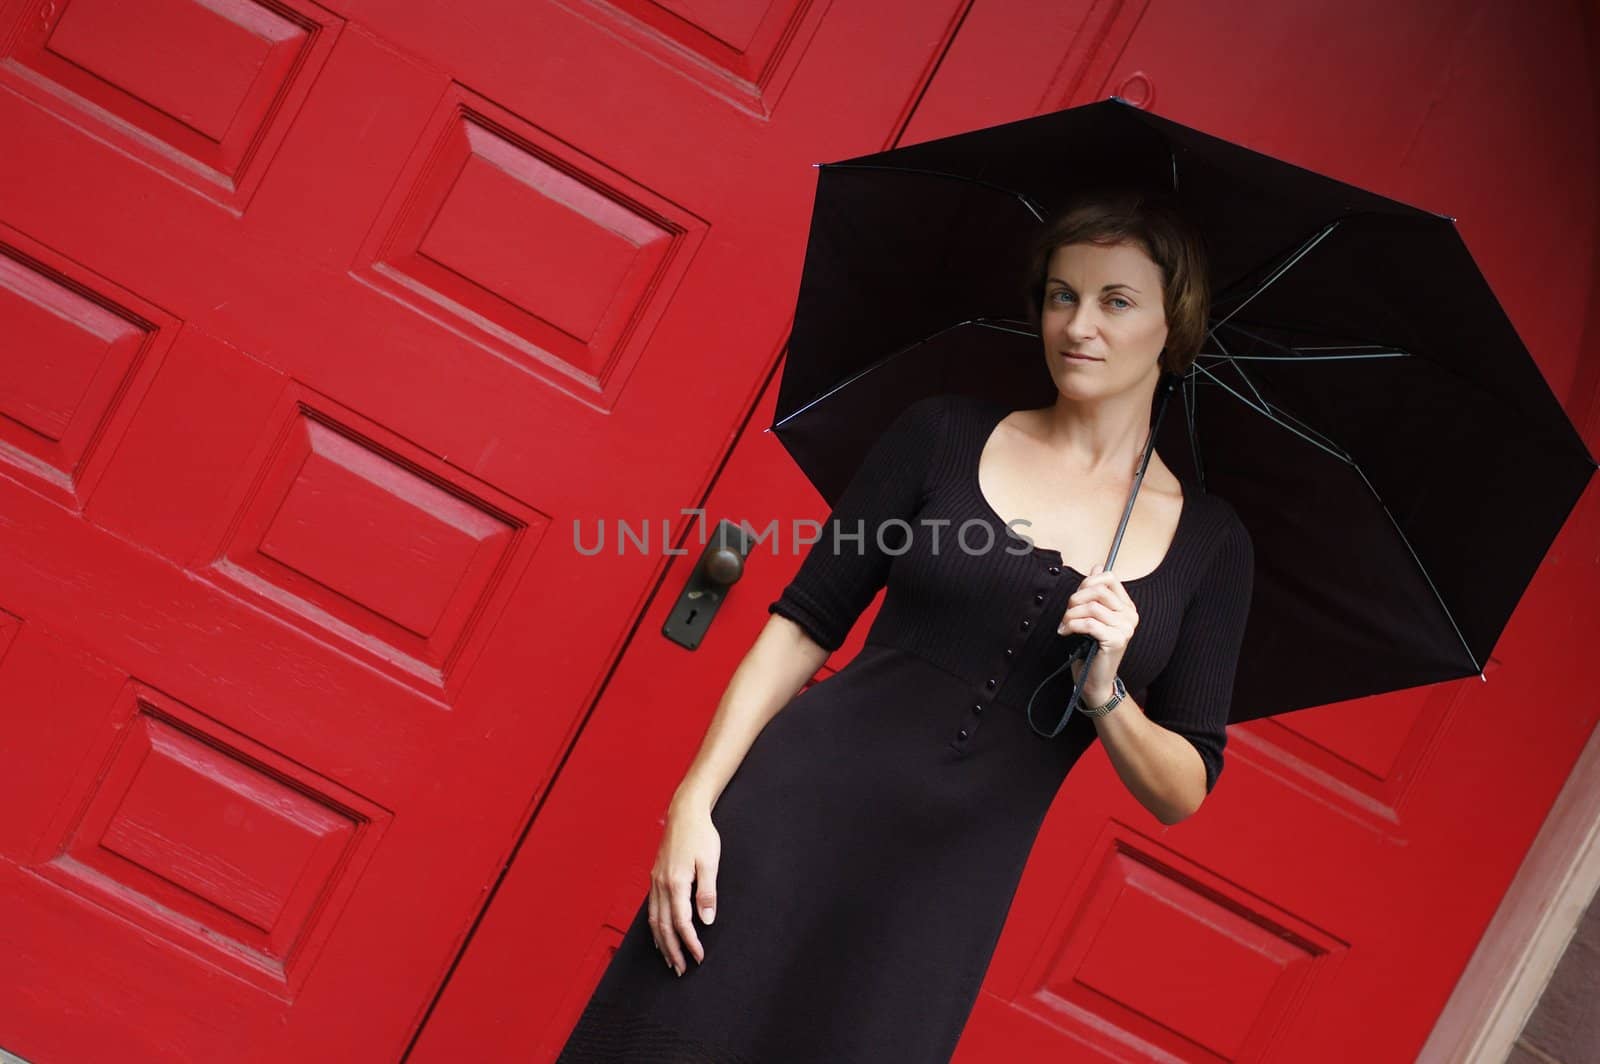 Woman with umbrella in front of red doors.